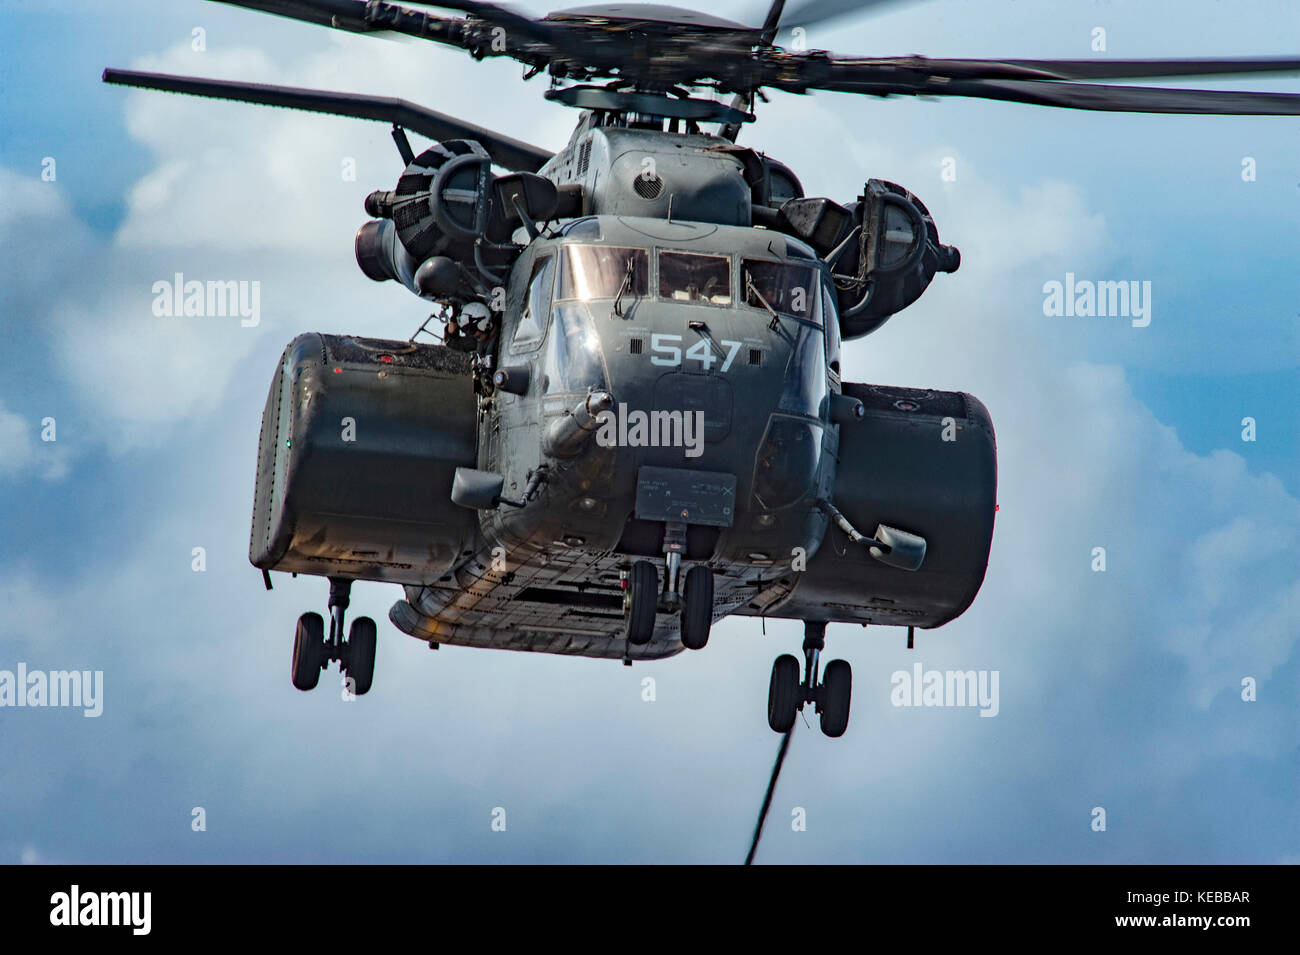 An MH-53E Sea Dragon helicopter assigned to the 'Vanguard' of Helicopter Mine Countermeasures Squadron Stock Photo